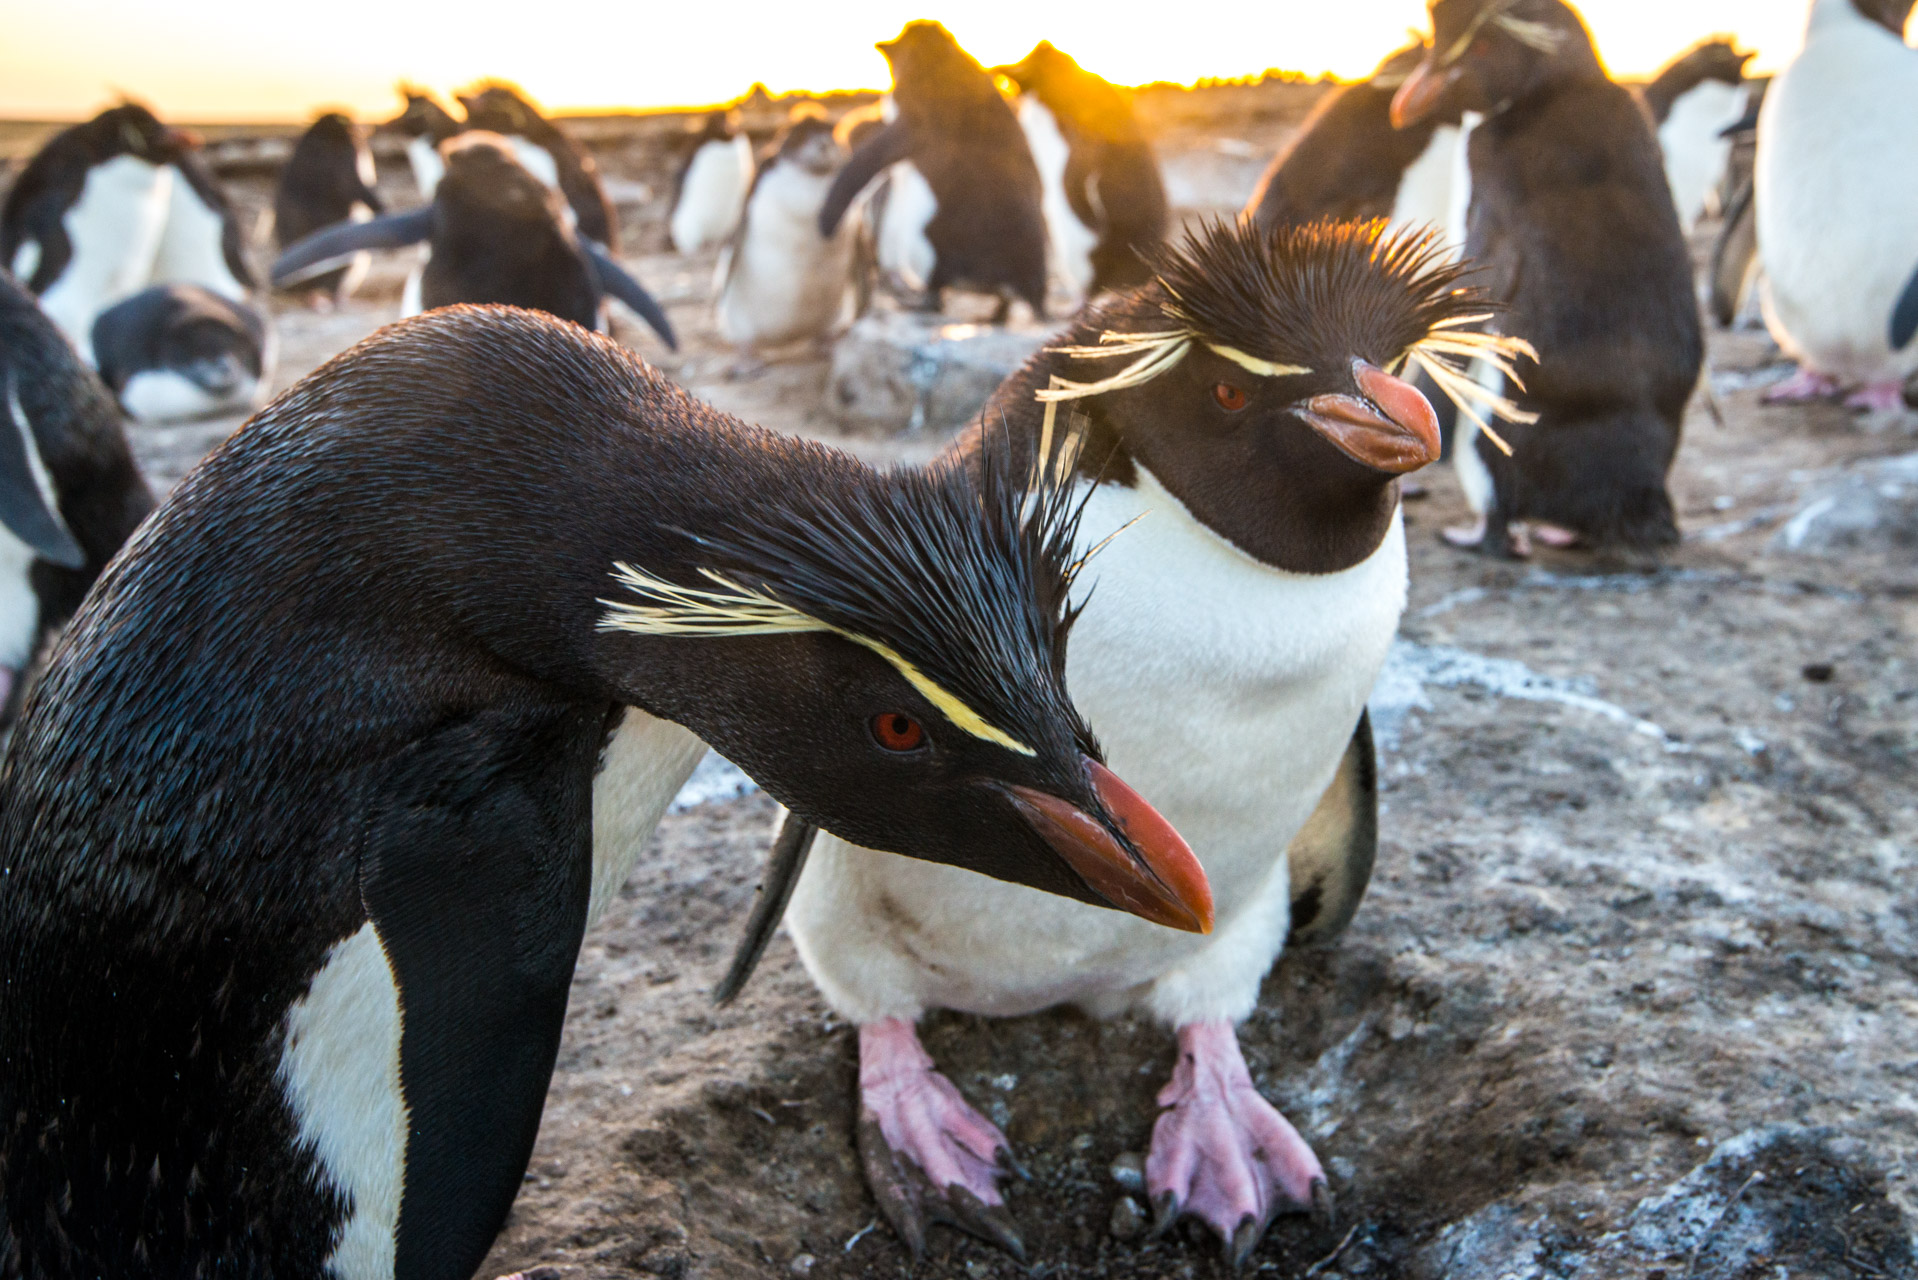 A pair of Southern Rockhopper Penguins, Eudyptes chrysocome, in the colony.